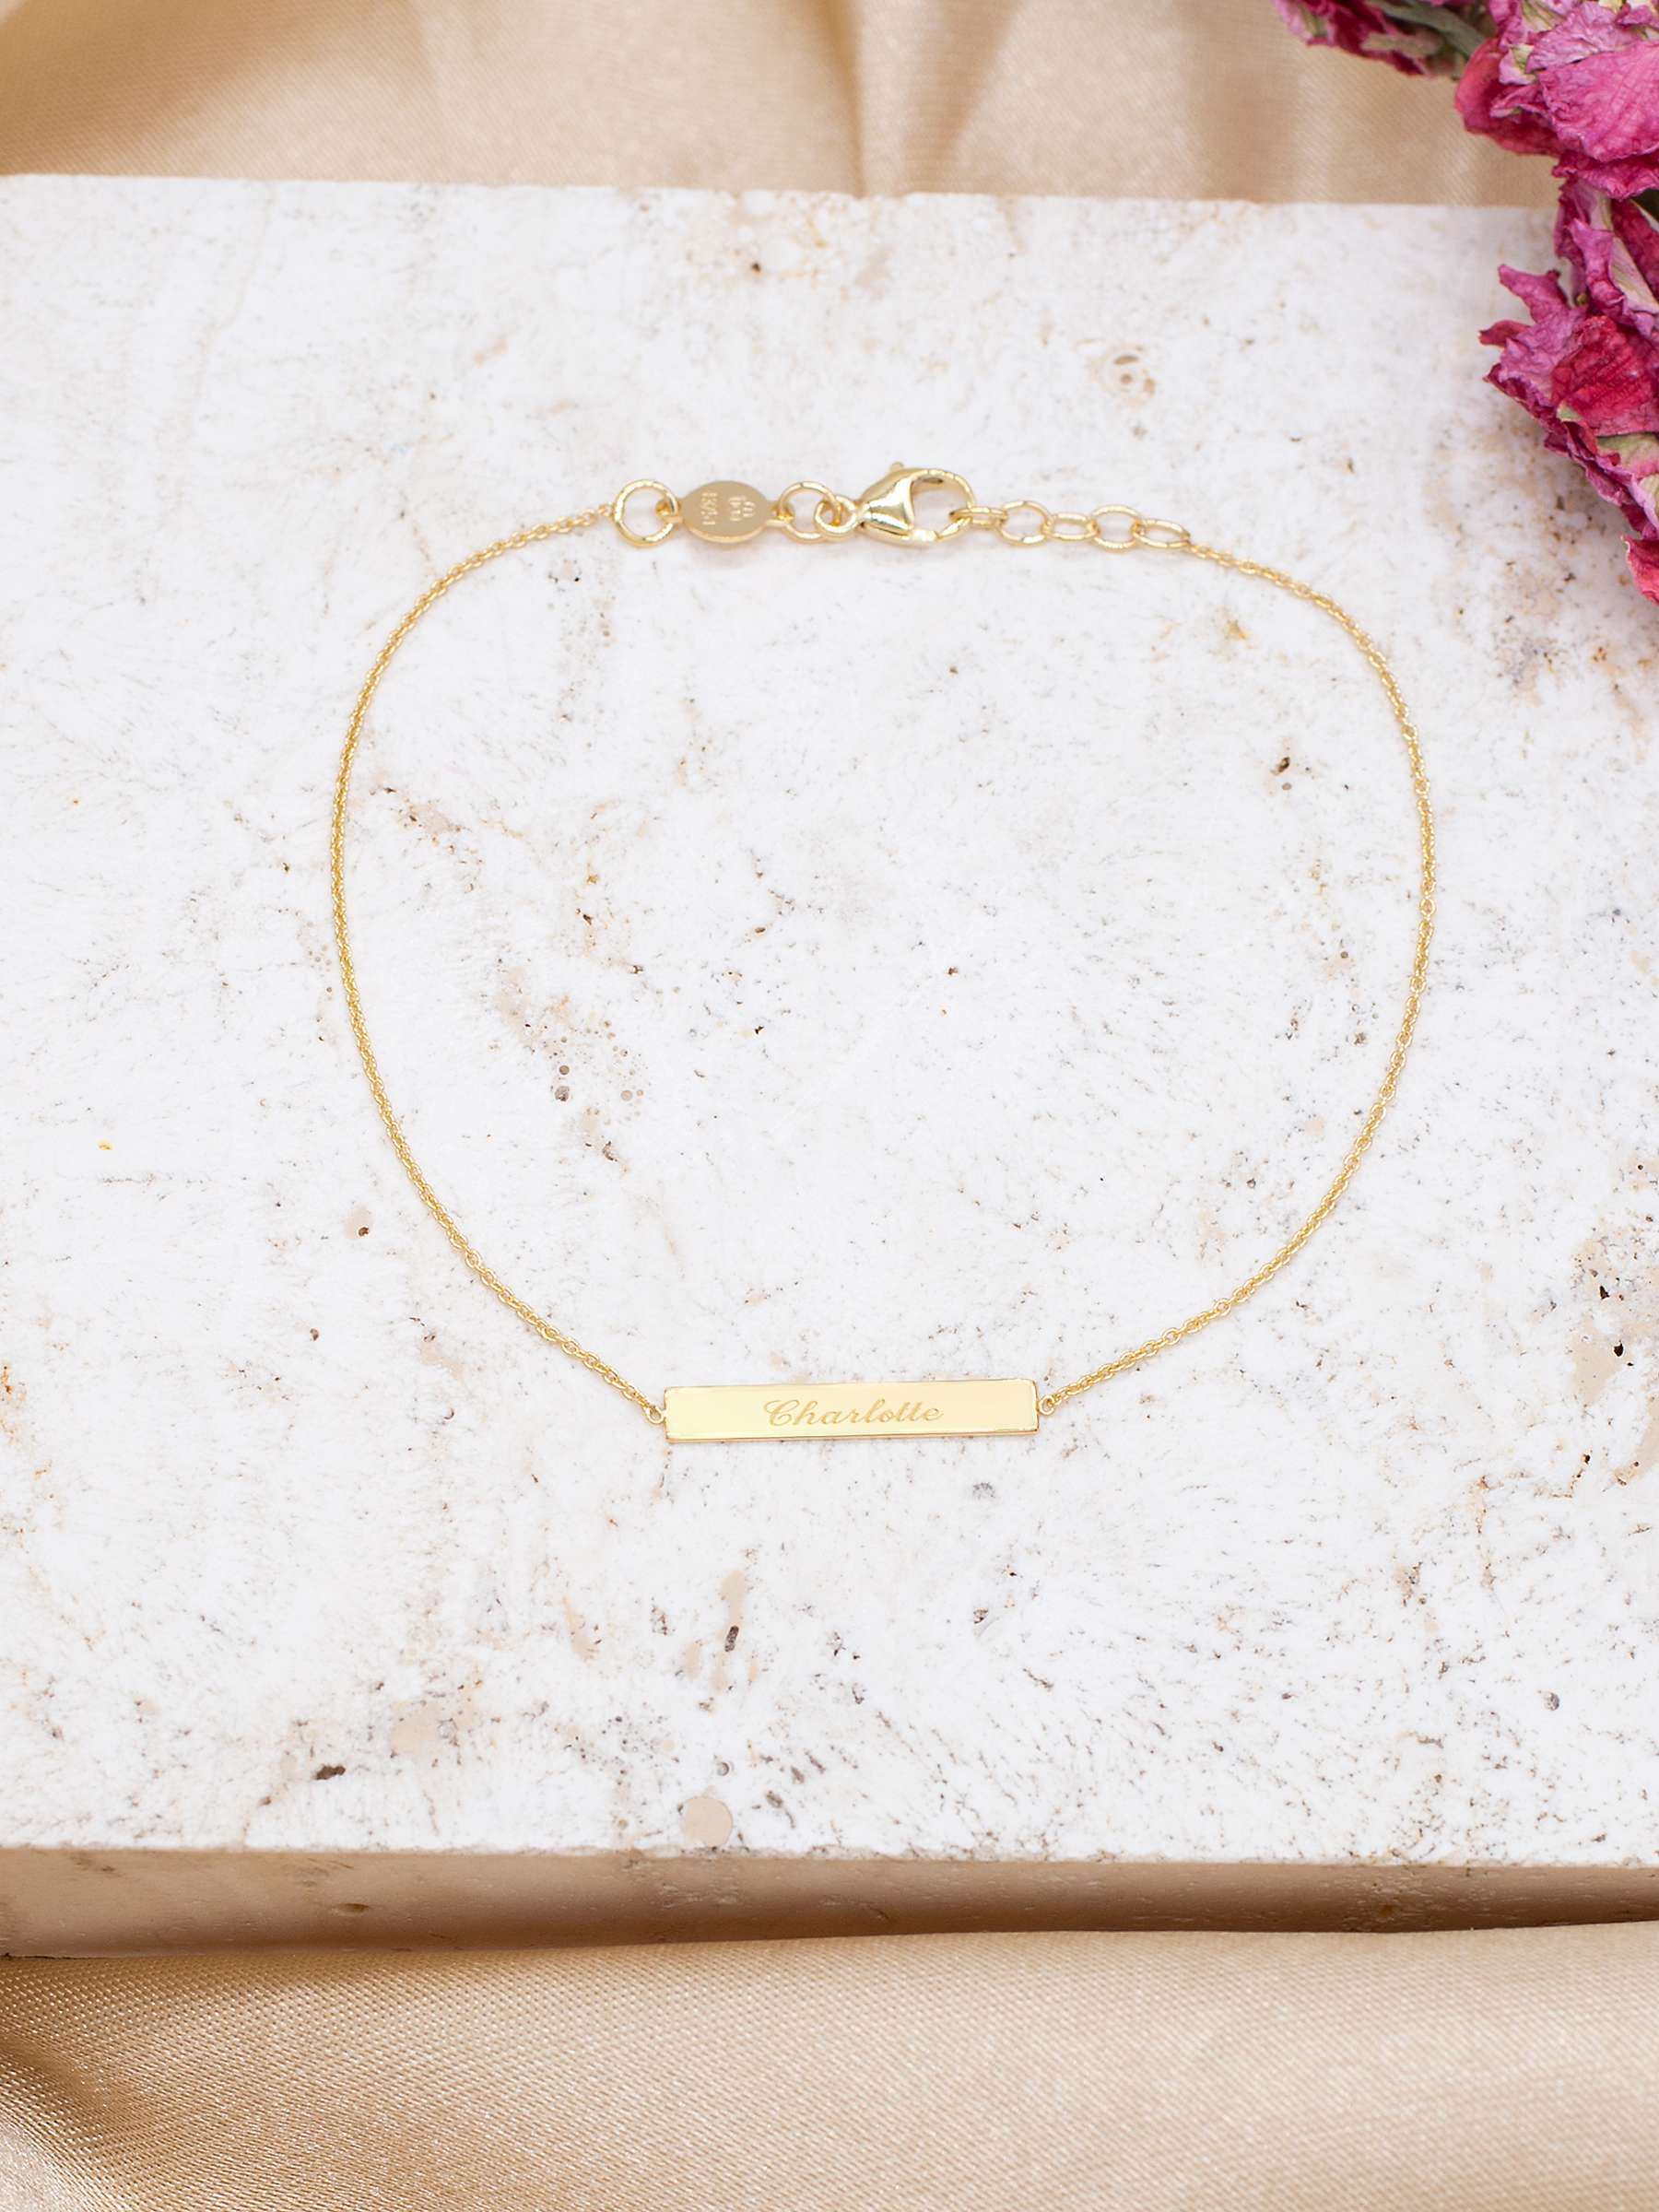 Buy IBB Personalised 9ct Gold Bar Initial Chain Bracelet Online at johnlewis.com